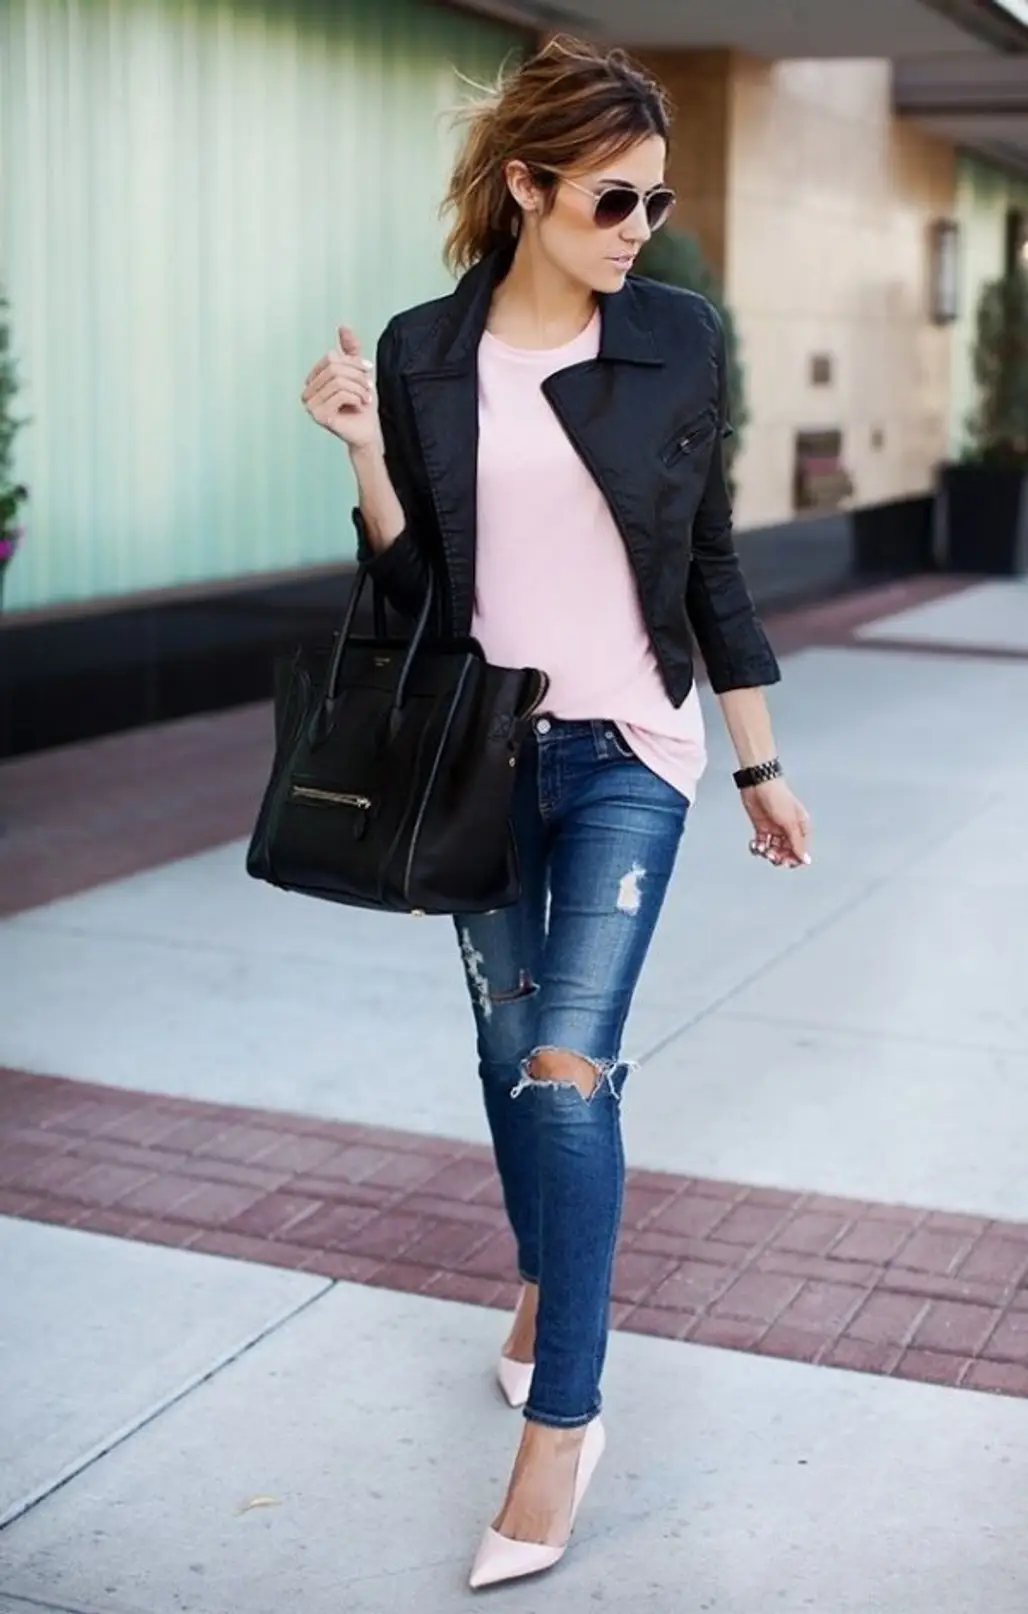 Pink Top with Jeans and Leather Jacket